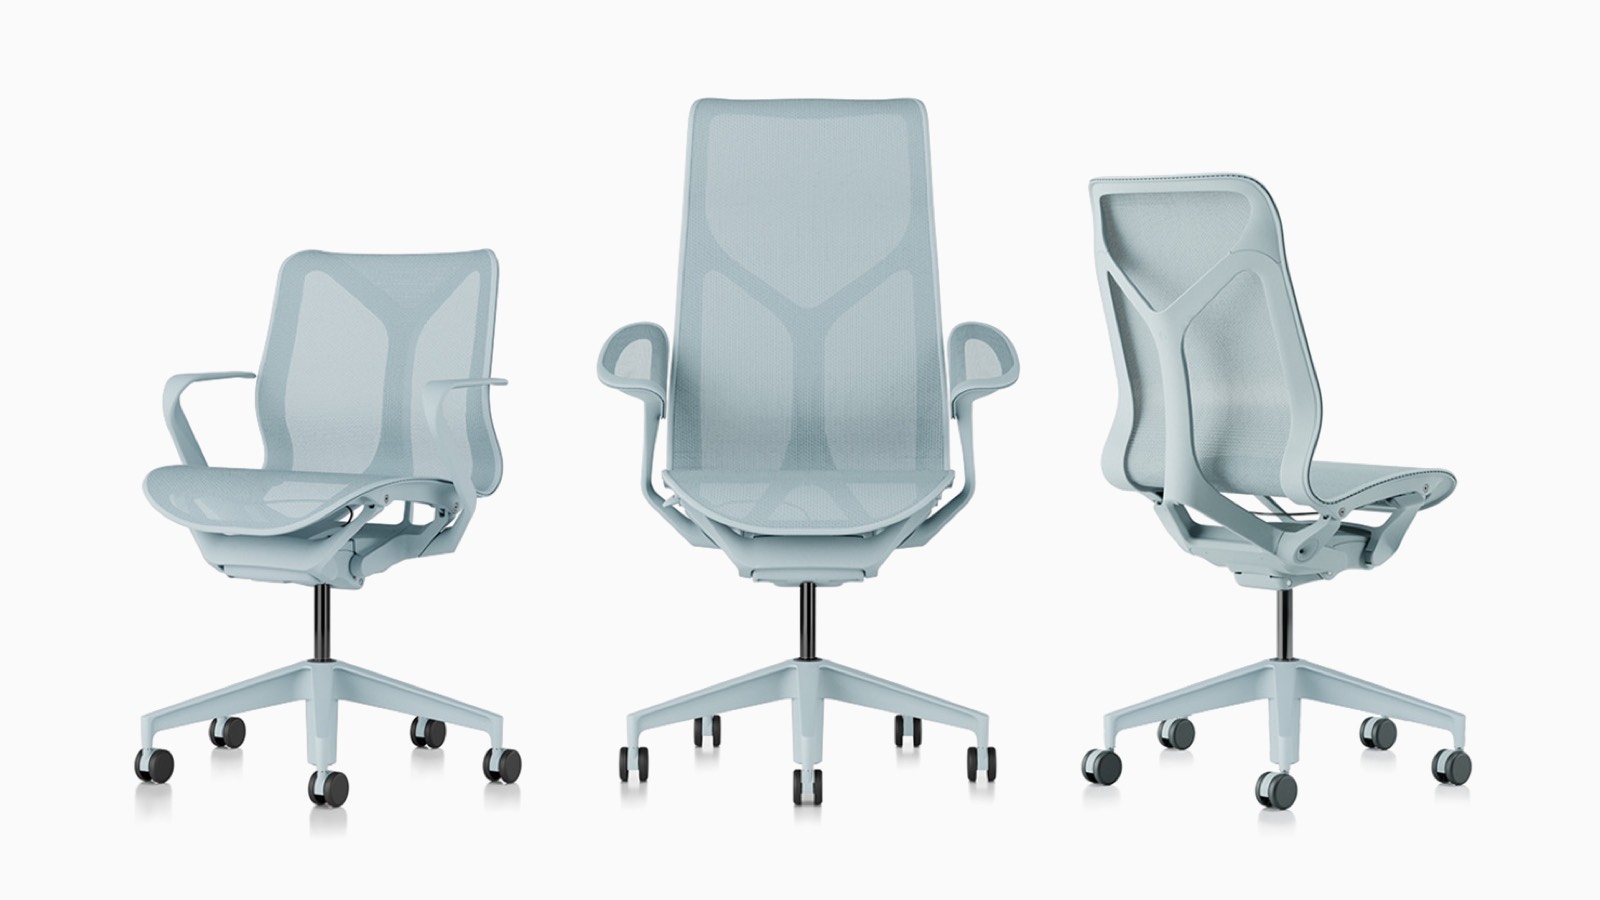 Low-back, high-back, and mid-back Cosm ergonomic desk chairs with suspension materials, bases, and frames in Glacier light blue.